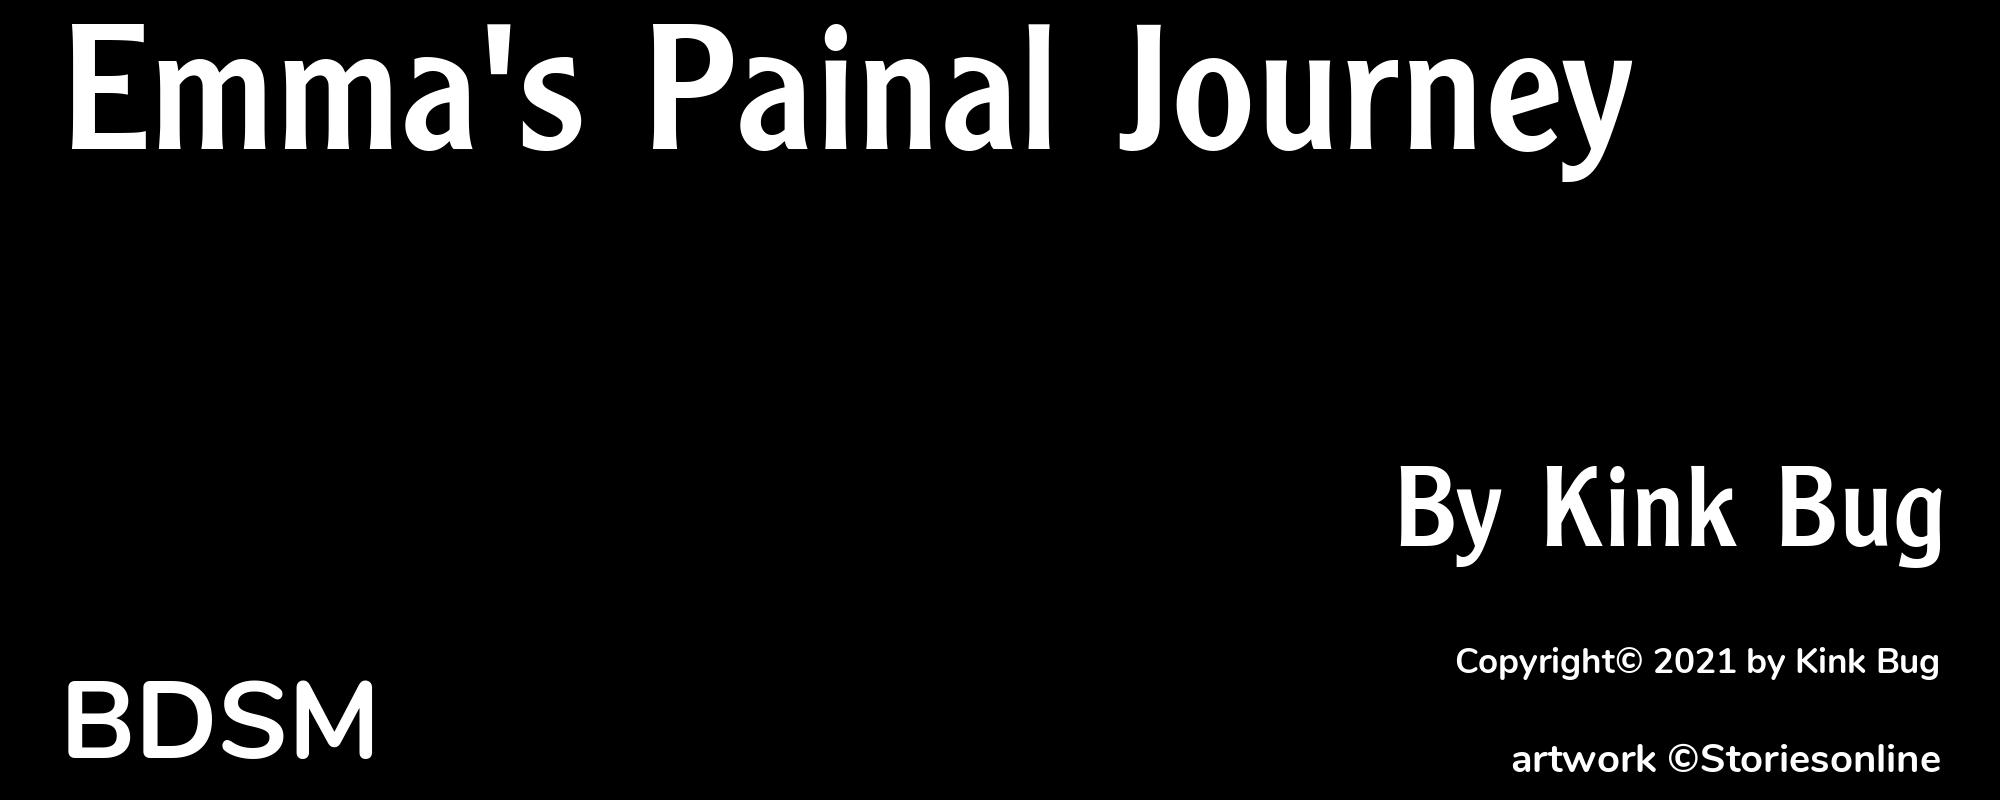 Emma's Painal Journey - Cover